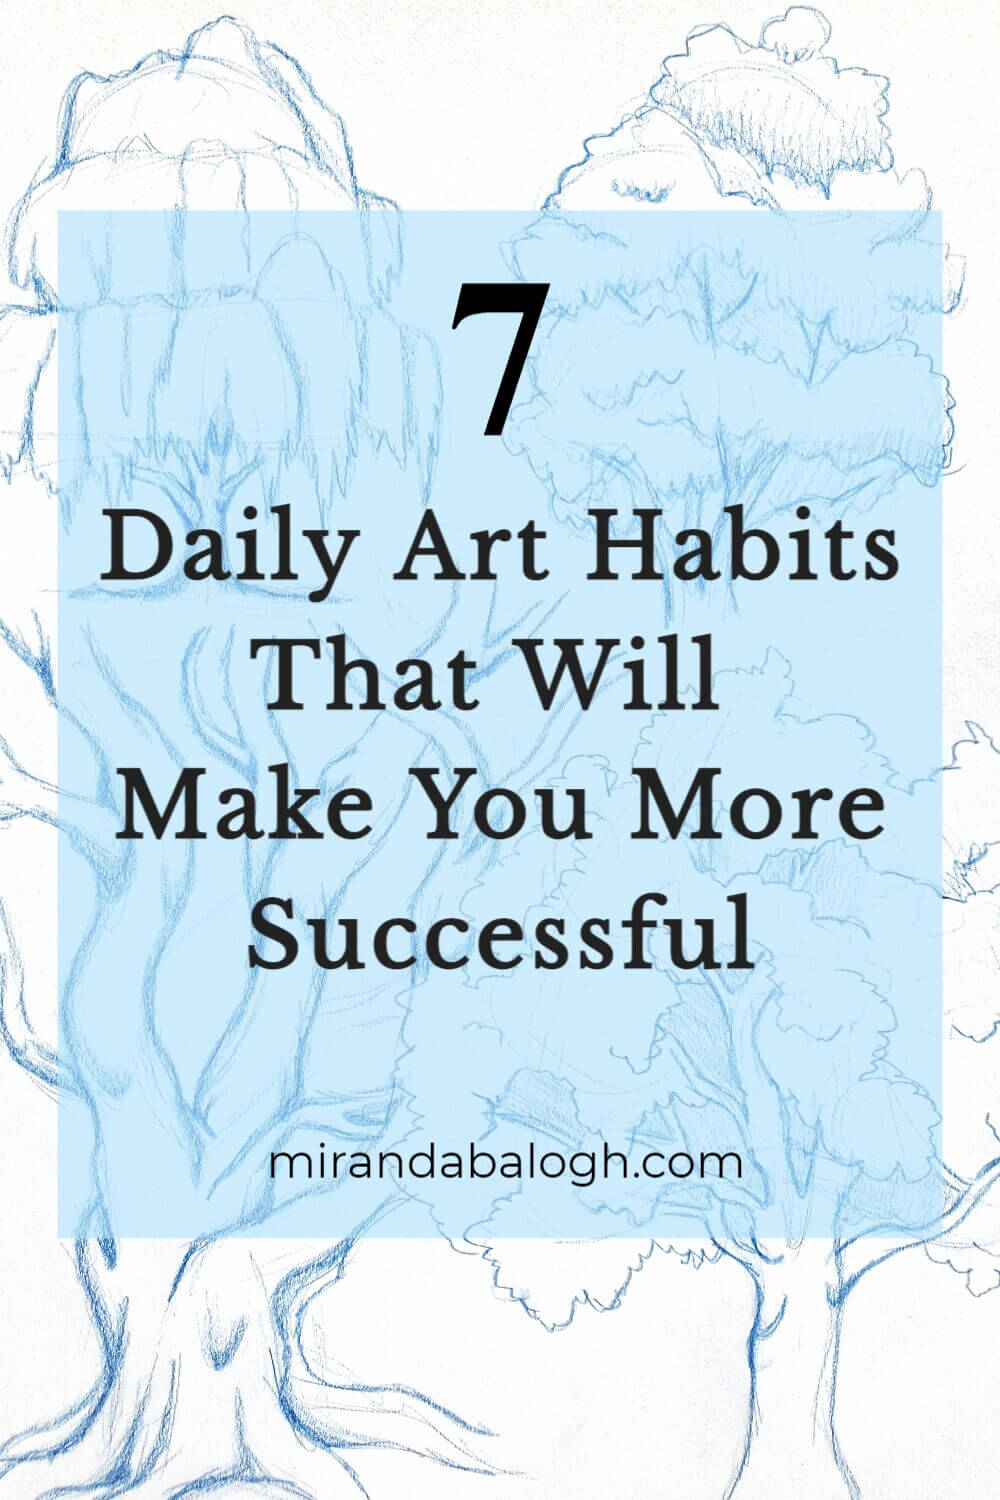 How can I practice art everyday? The best way is to create a daily art practice in which you make new artwork each day. If you don’t know how to make art every day, then you need to build a habit based on daily creative practice. These 7 daily art habits will help you find daily drawing prompts and give you drawing tips to help you create a successful art routine that you’ll stick to.